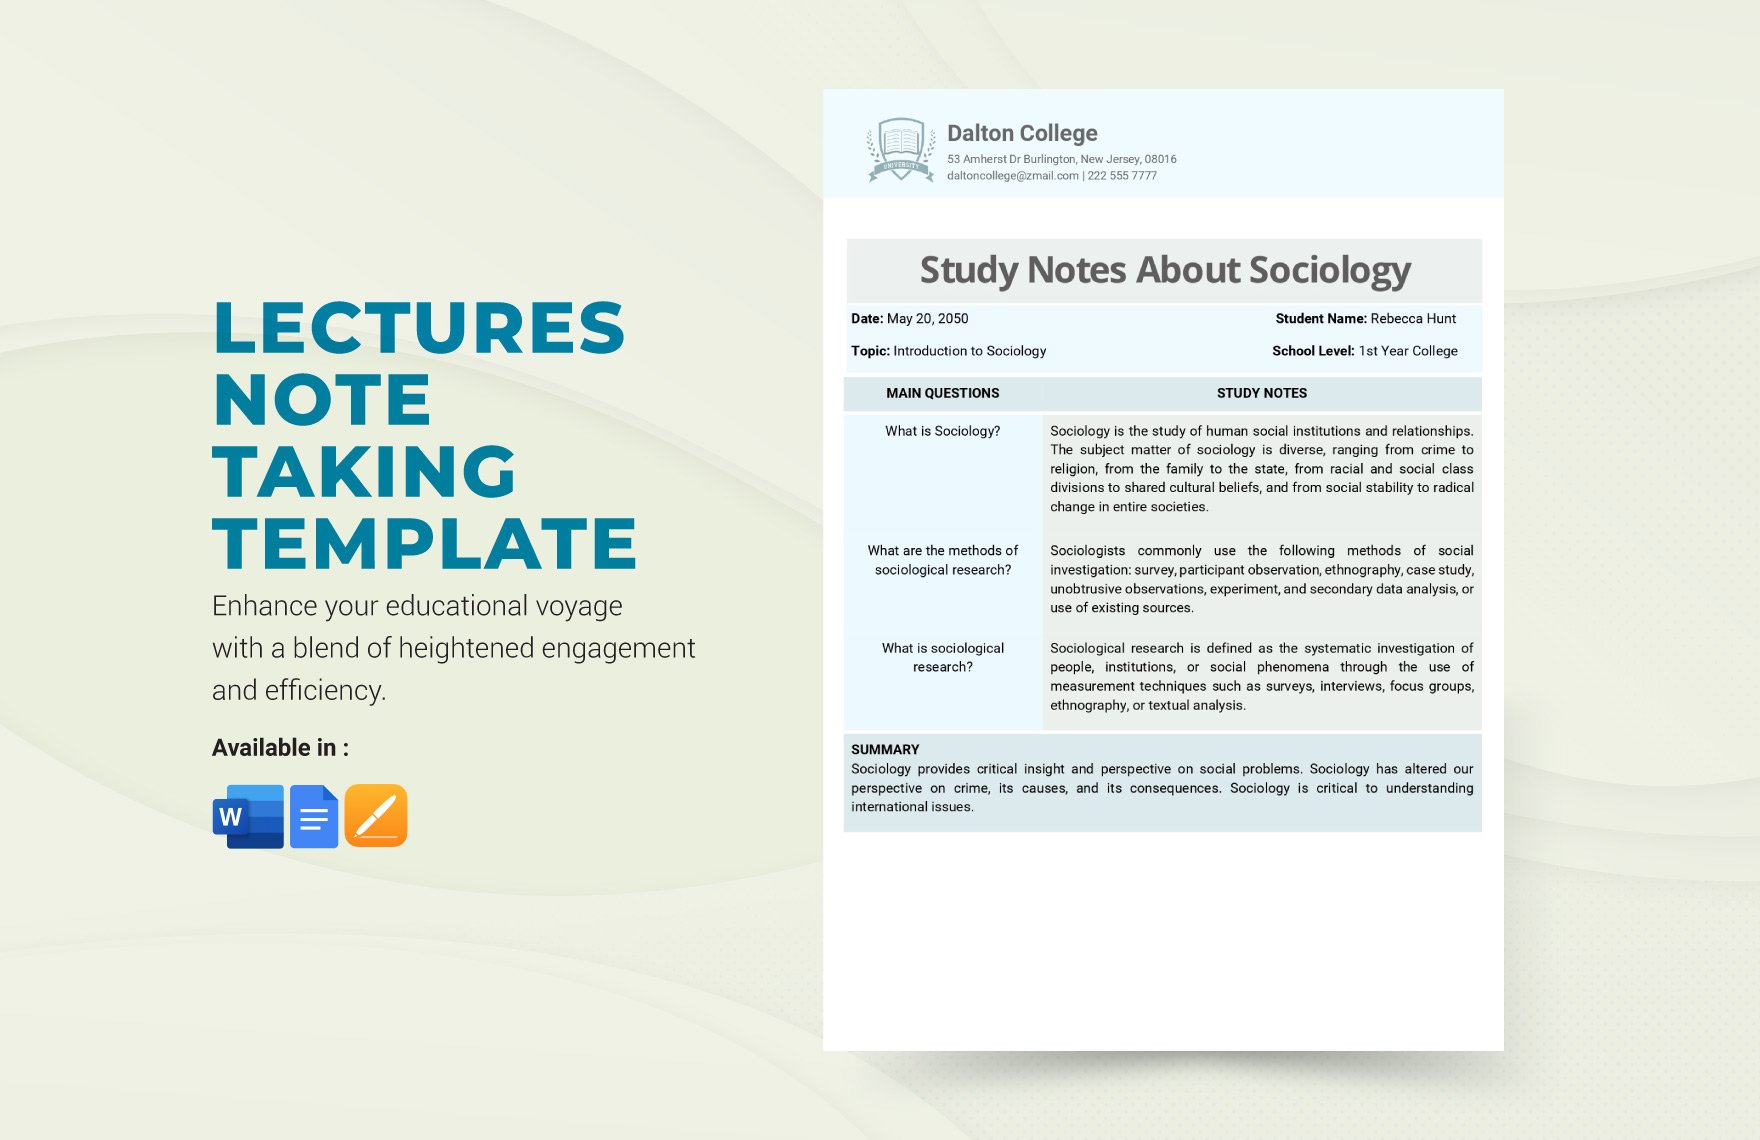 Lecture Notes Taking Template